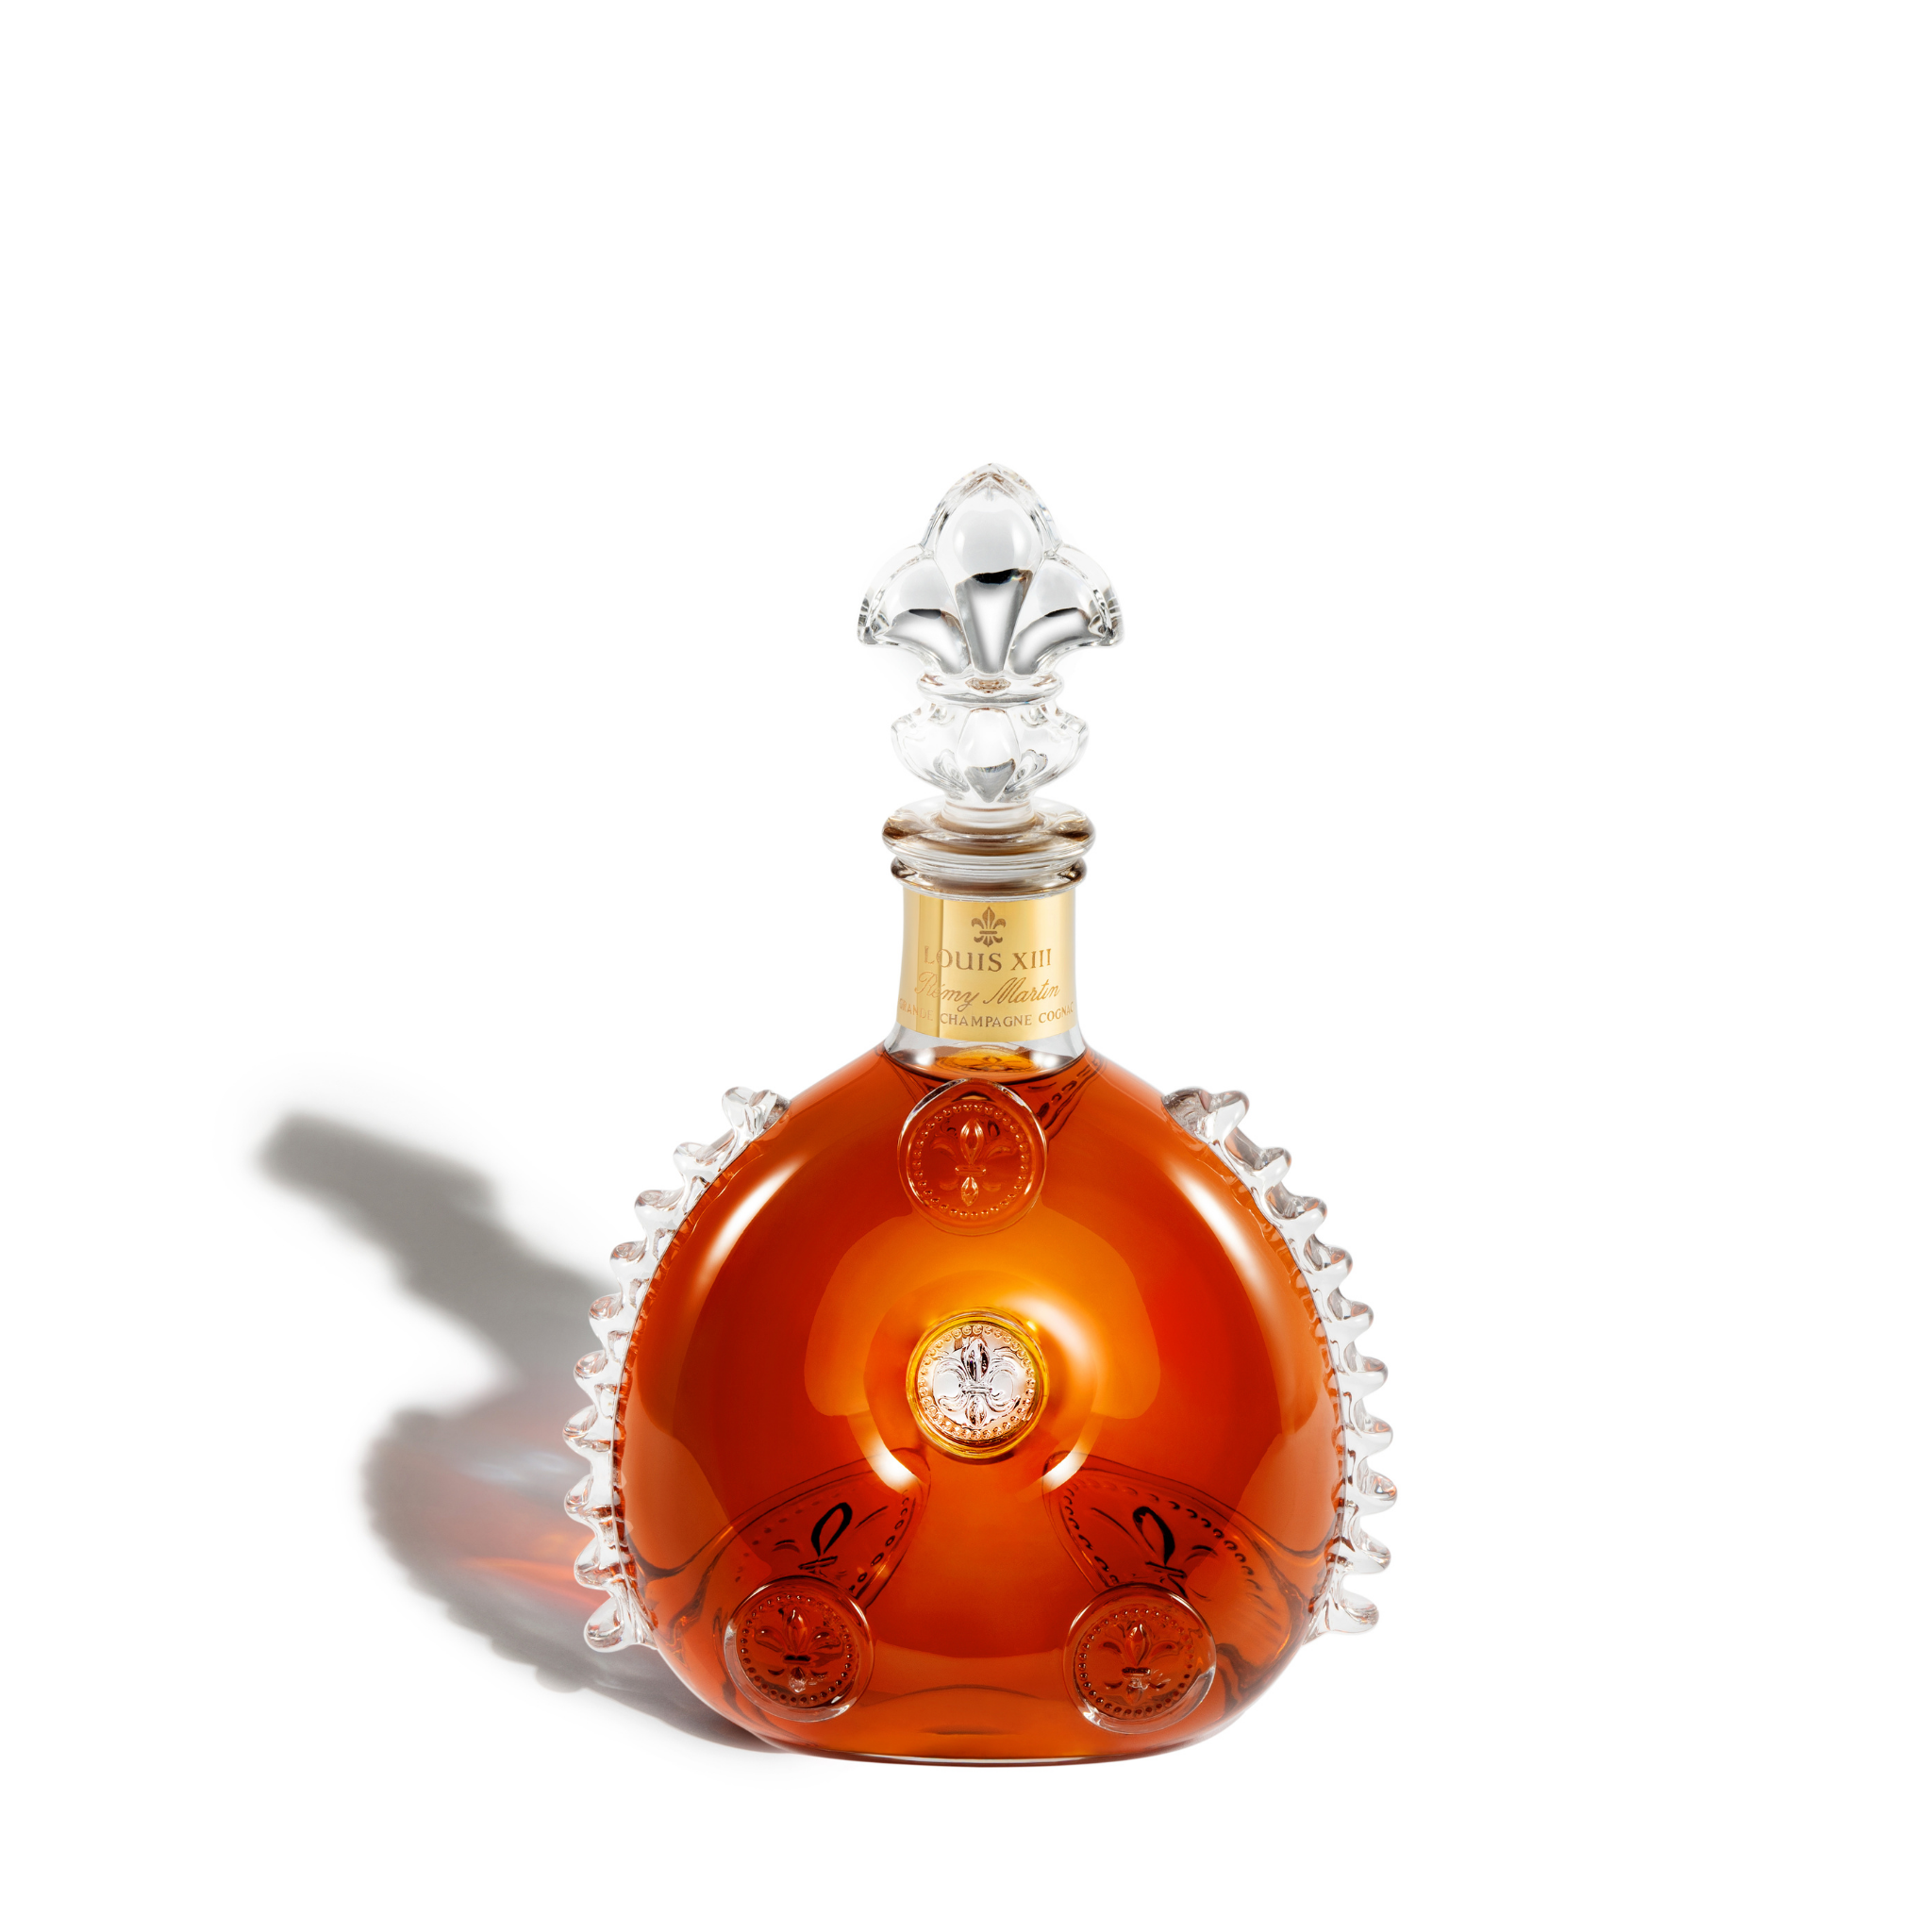 Shop The Louis XIII Collection